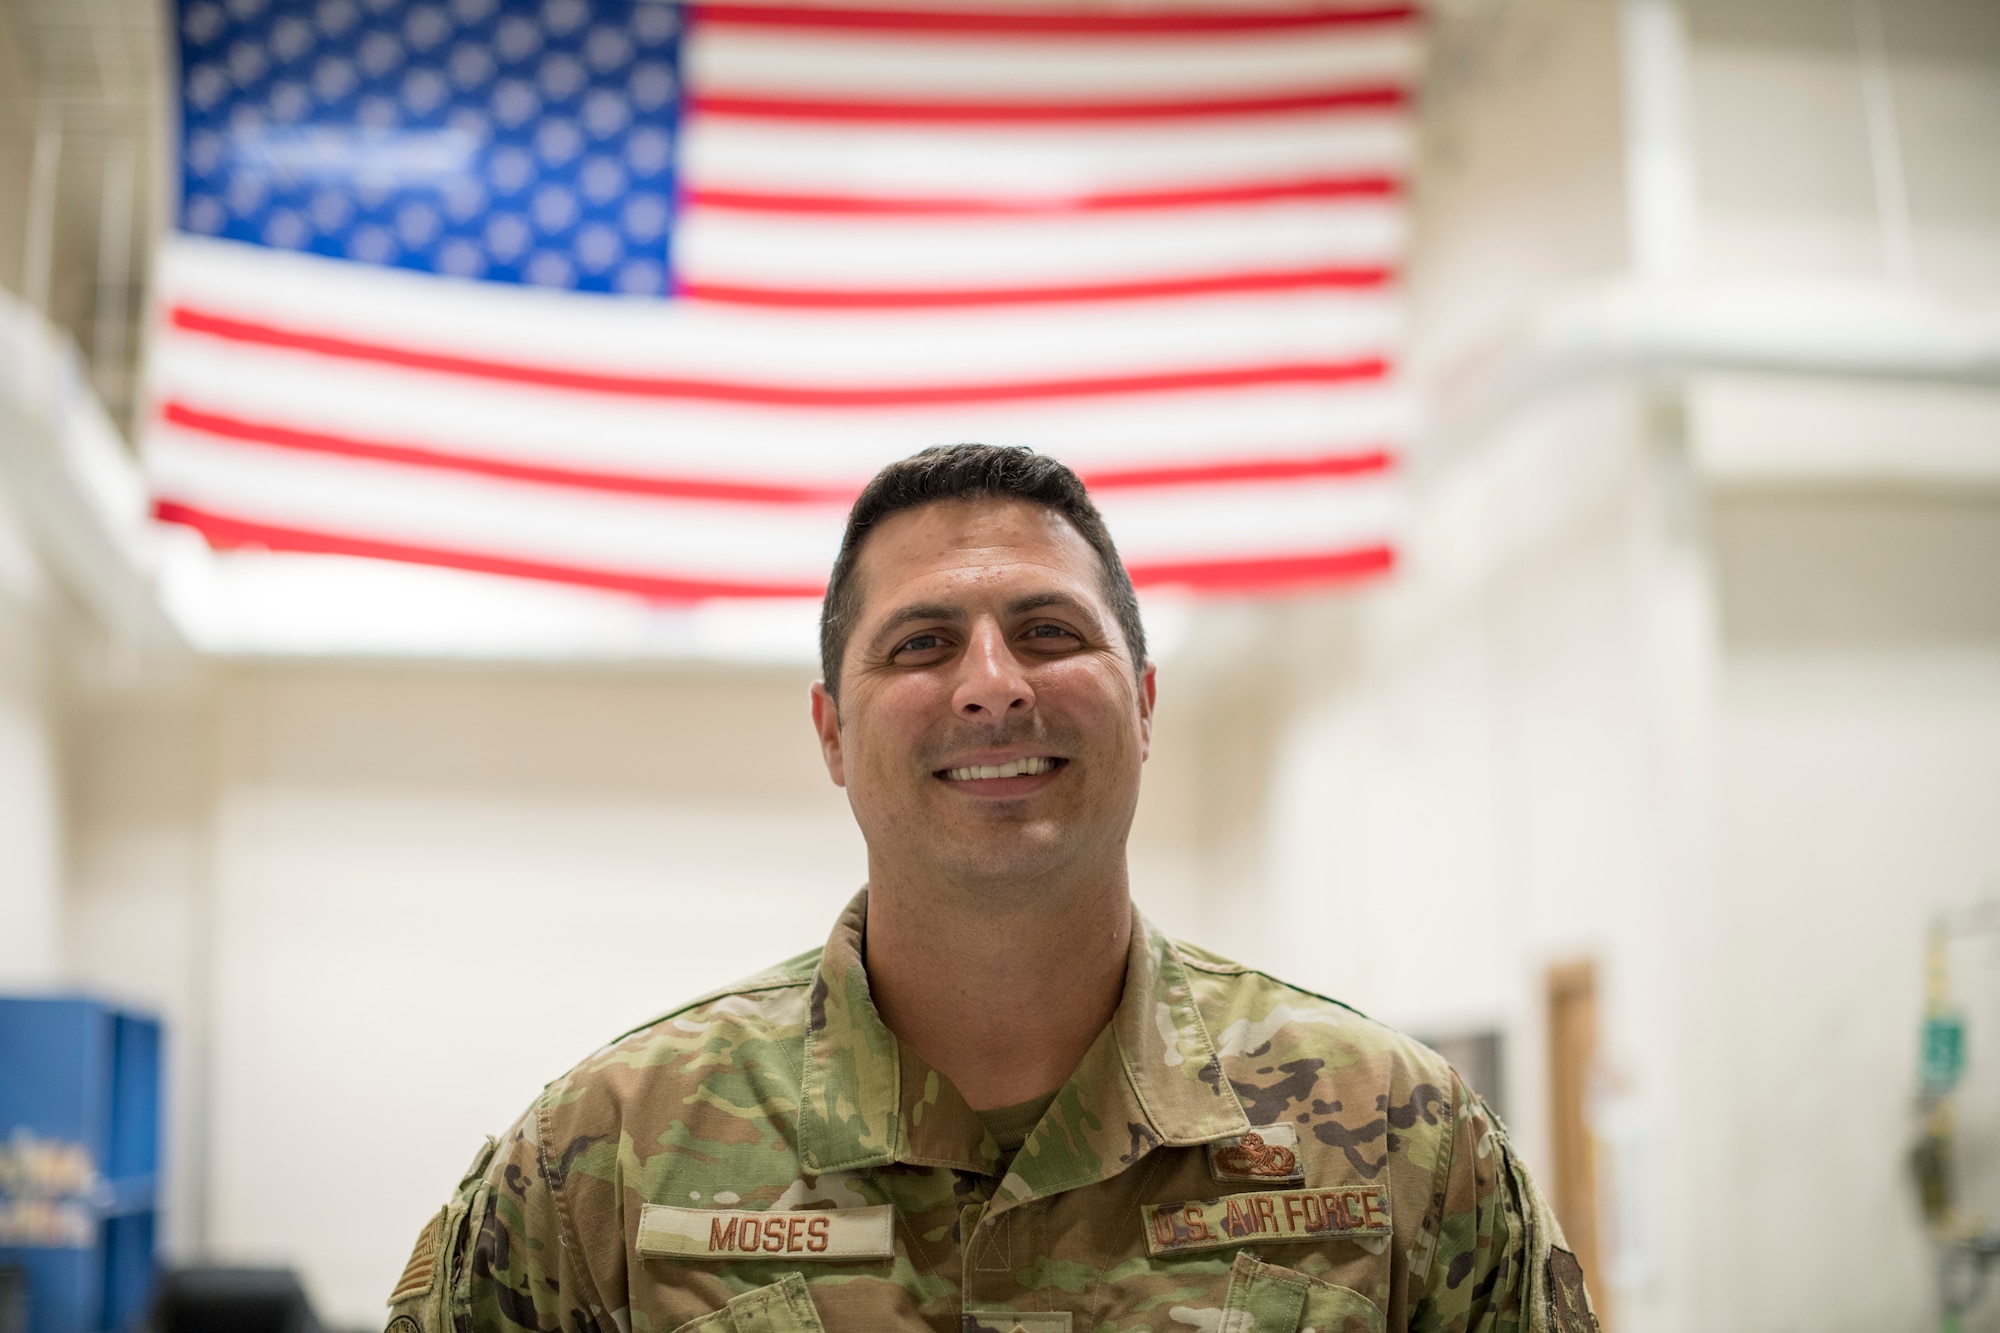 Senior Master Sgt. Justin Moses, production superintendent for the 403rd Aircraft Maintenance Squadron at Keesler Air Force Base, Miss., smiles for a photo in the Roberts Consolidated Maintenance Facility March 26, 2021. Moses received the 2020 Air Force Reserve Comand Lt. Gen. Leo Marquez and Maintenance Effectiveness award in the aircraft maintenance supervisor manager category for his work during a busy 2020. (U.S. Air Force photo by Staff Sgt. Kristen Pittman)